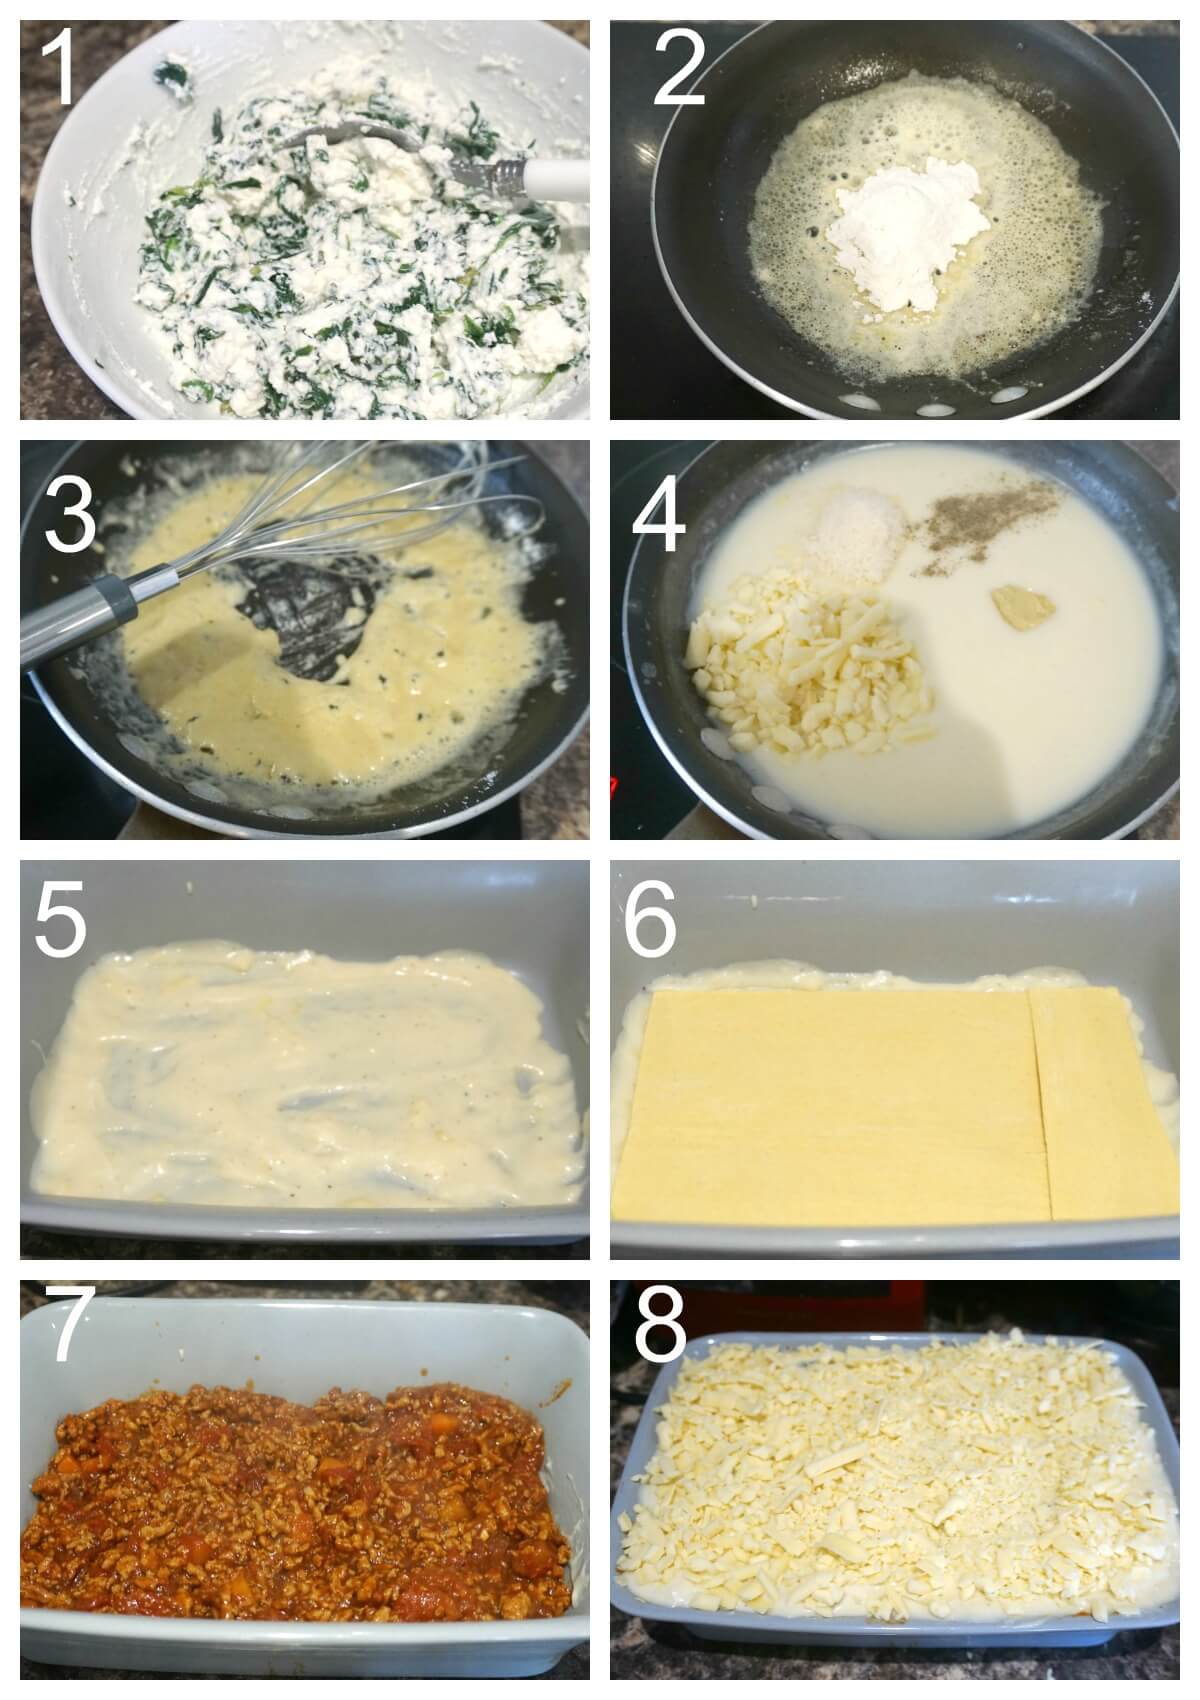 Collage of 8 photos to show how to assemble the lasagna.